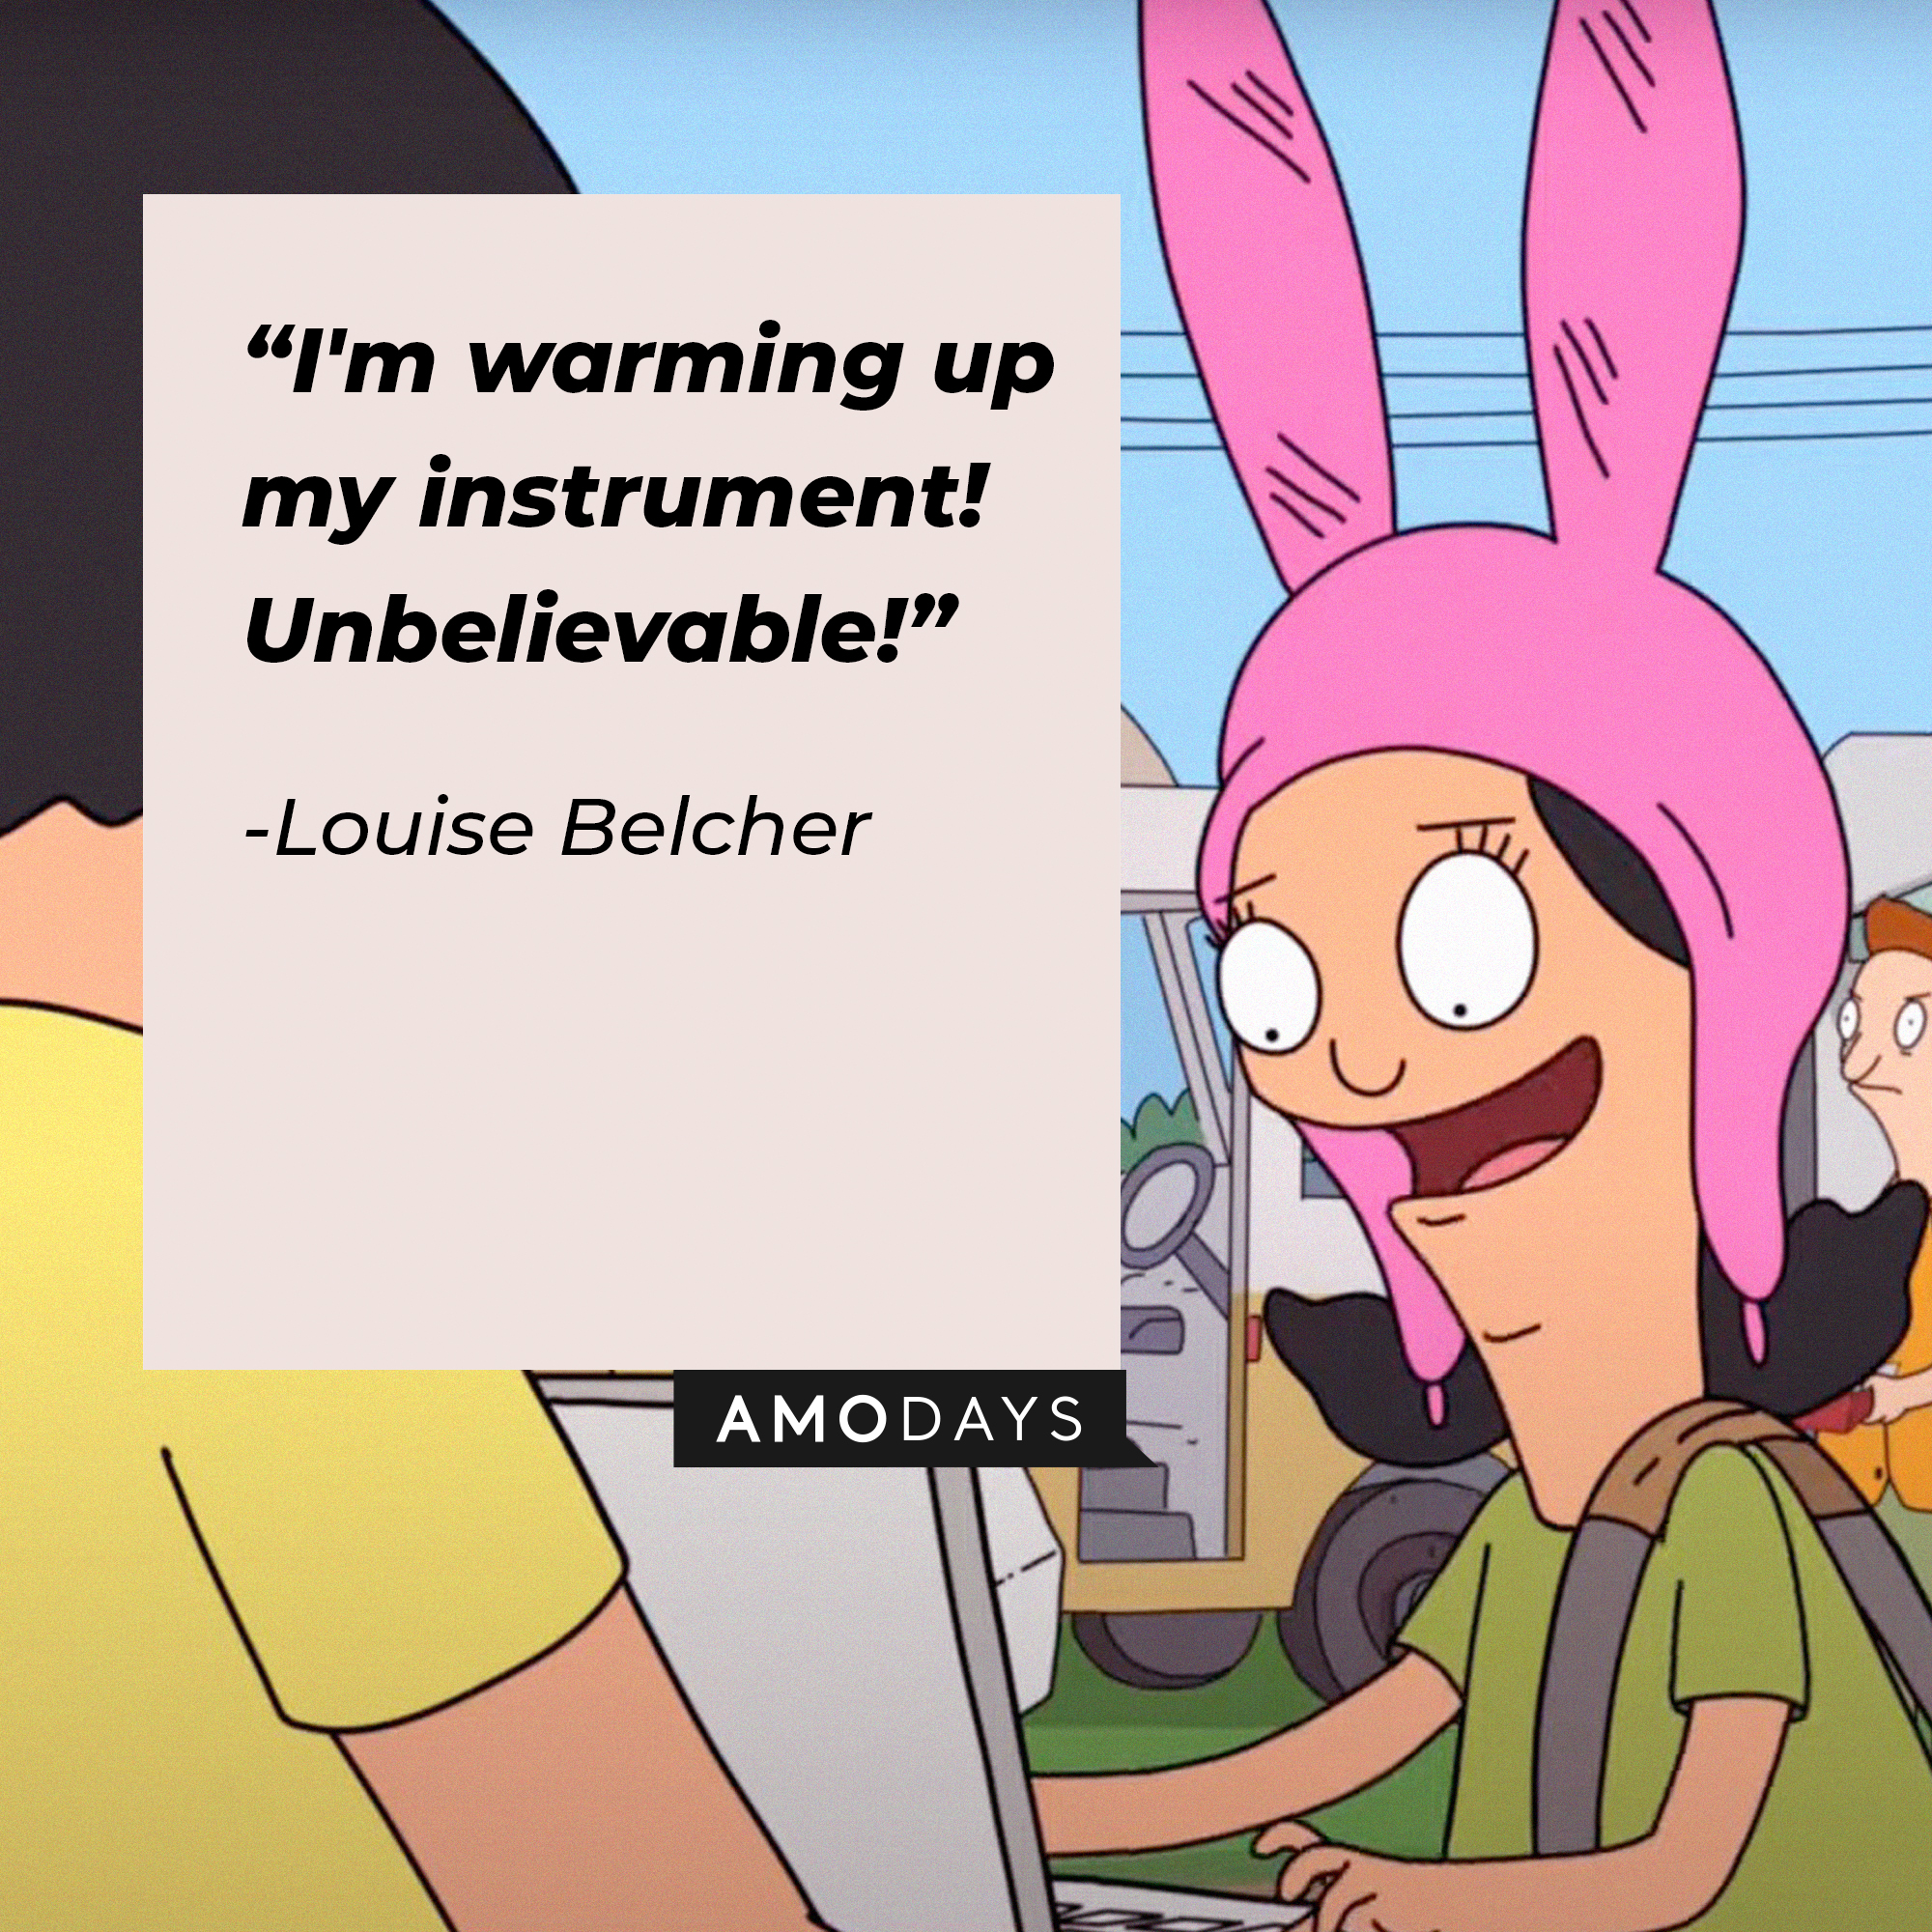 An image of Louise Belcher with her quote: “I’m warming up my instrument! Unbelievable!” | Source: facebook.com/BobsBurgers